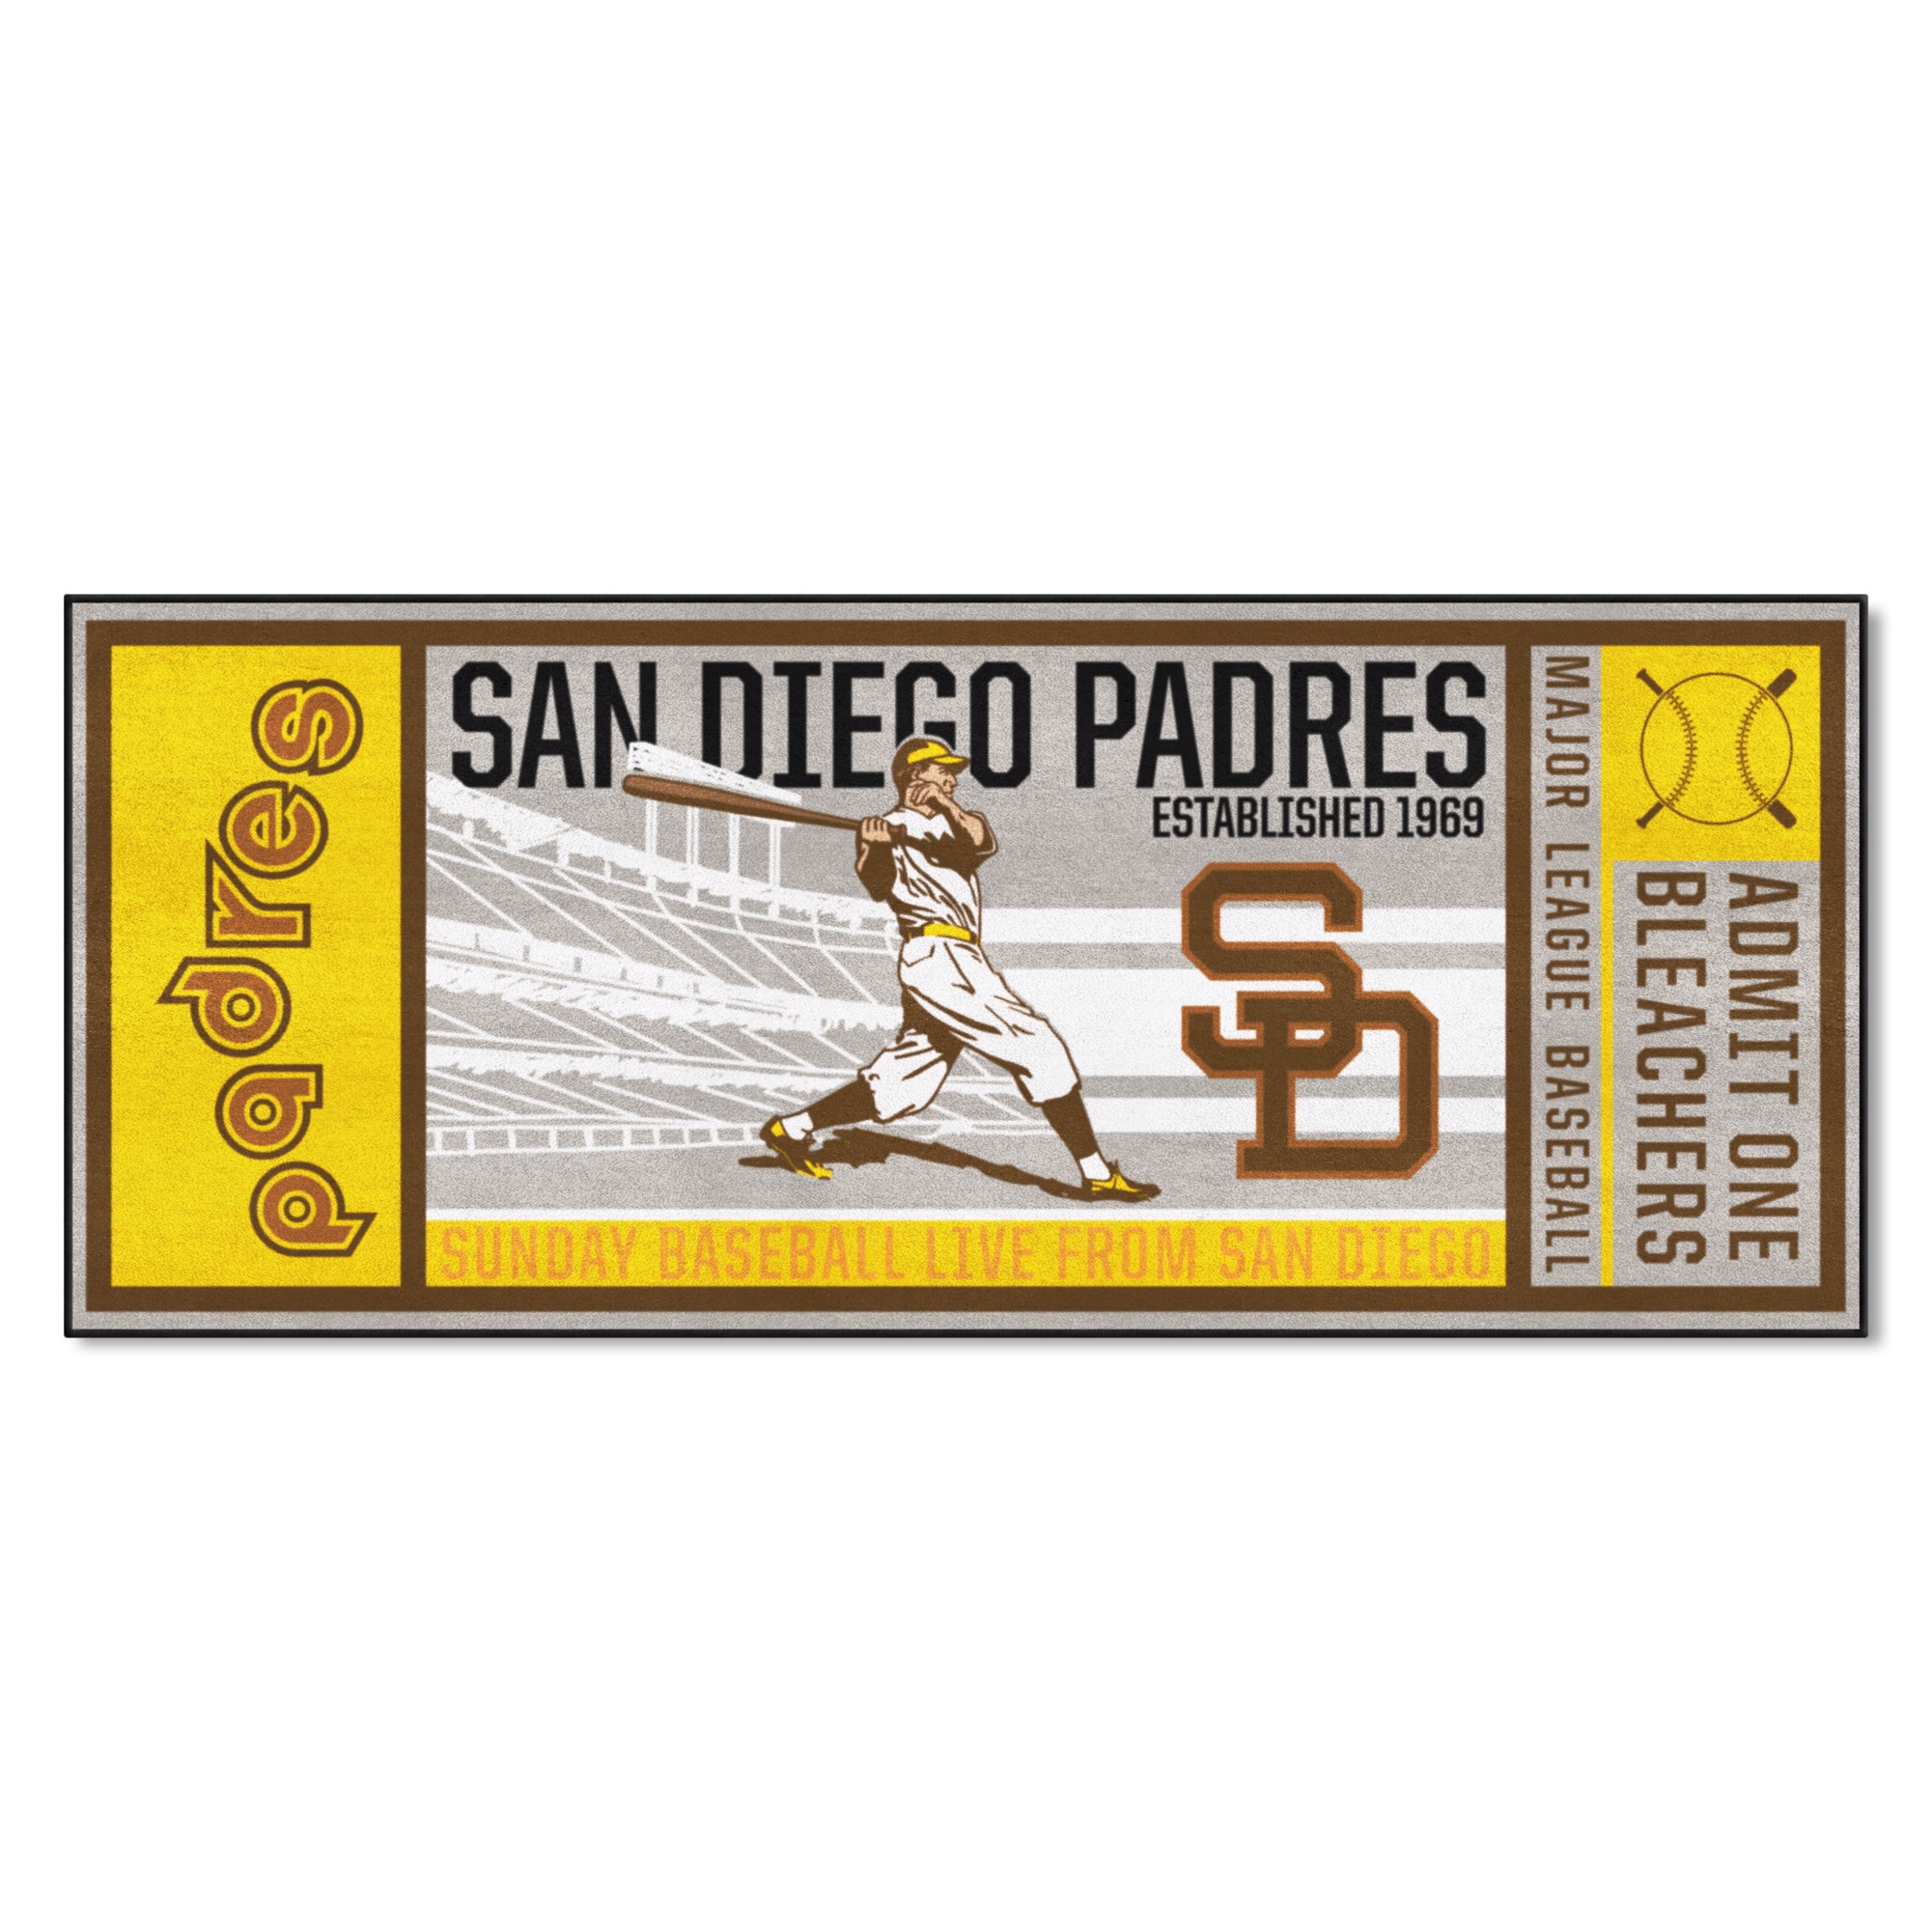 Official Vintage Padres Clothing, Throwback San Diego Padres